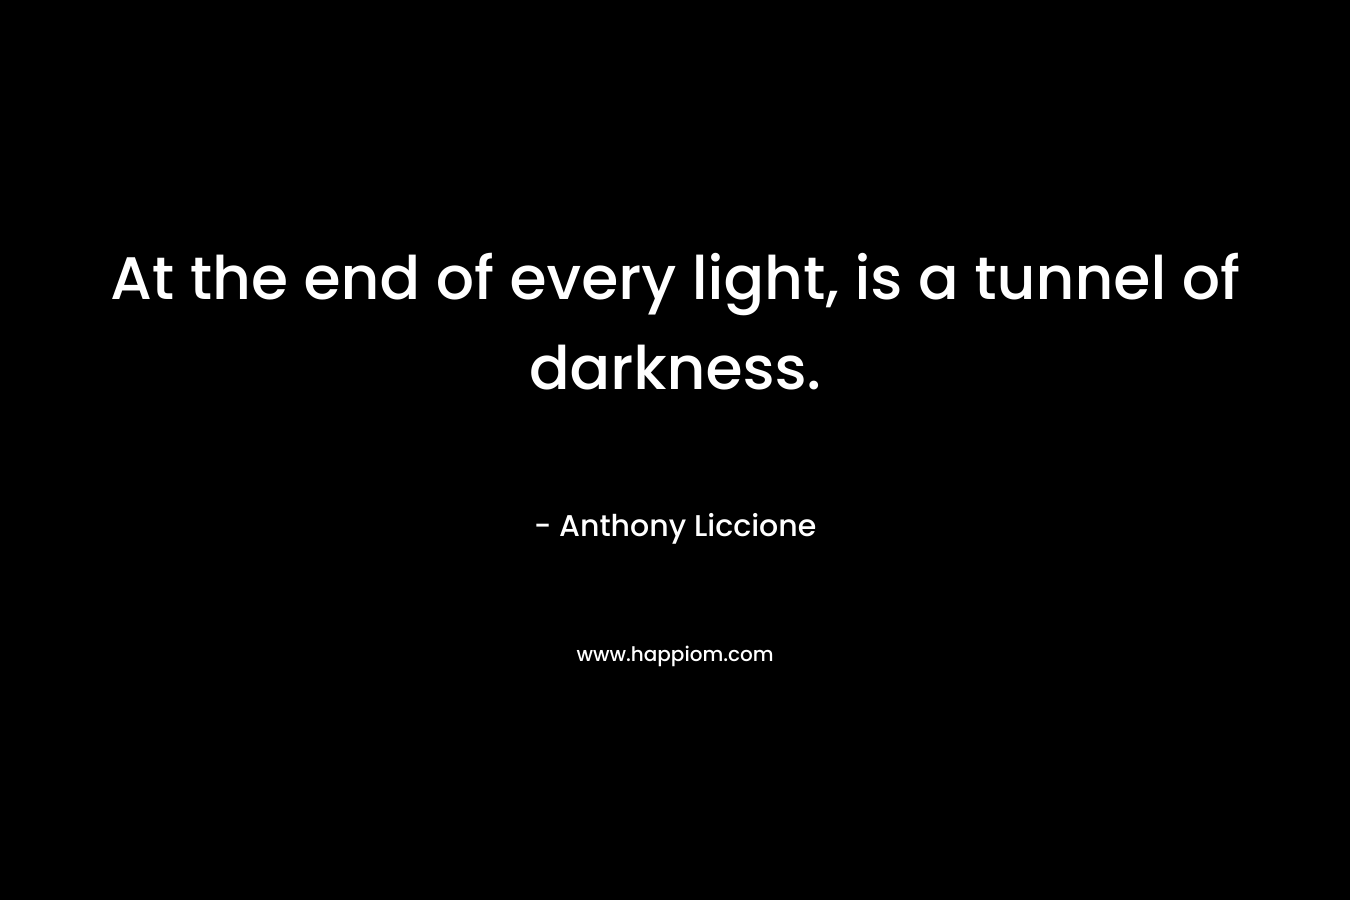 At the end of every light, is a tunnel of darkness.